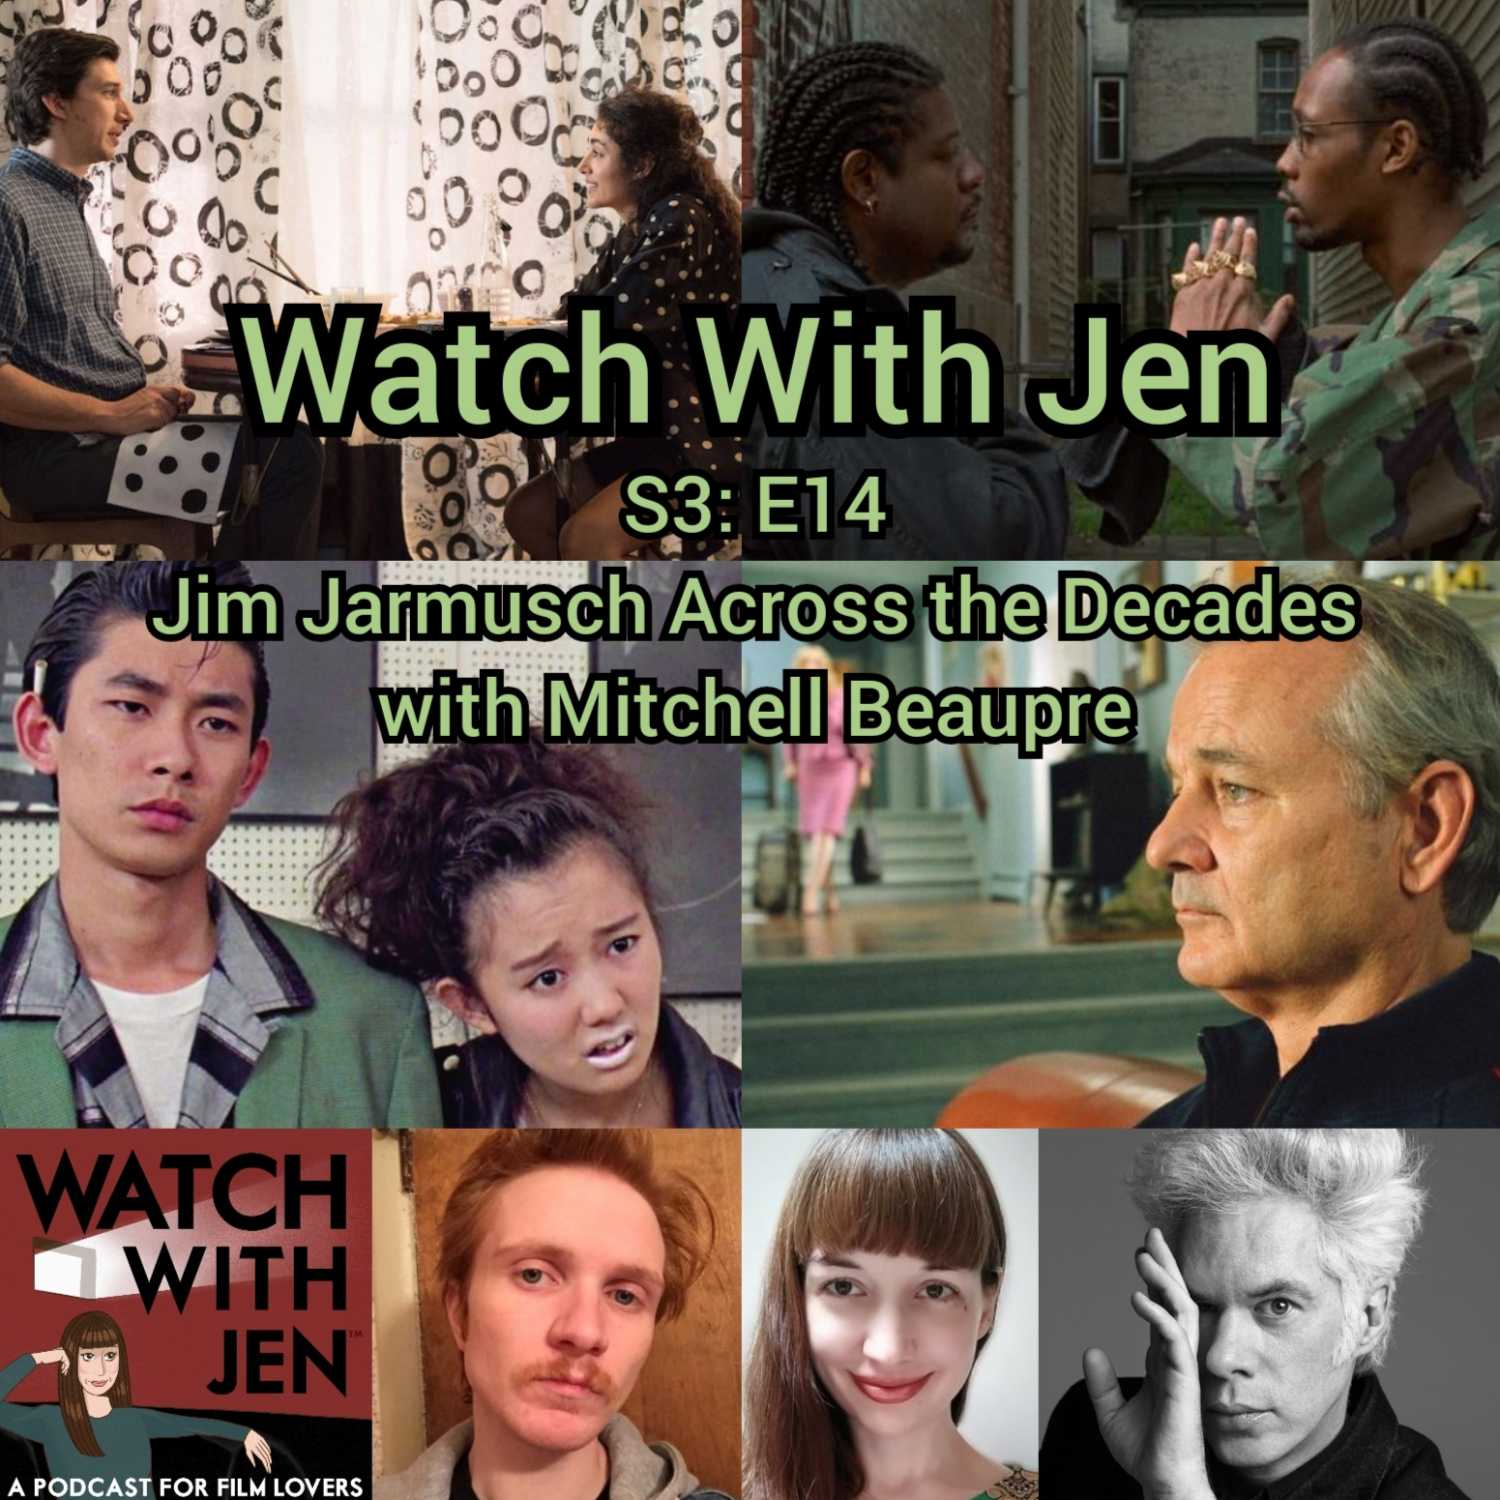 Watch With Jen - S3: E14 - Jim Jarmusch Across the Decades with Mitchell Beaupre